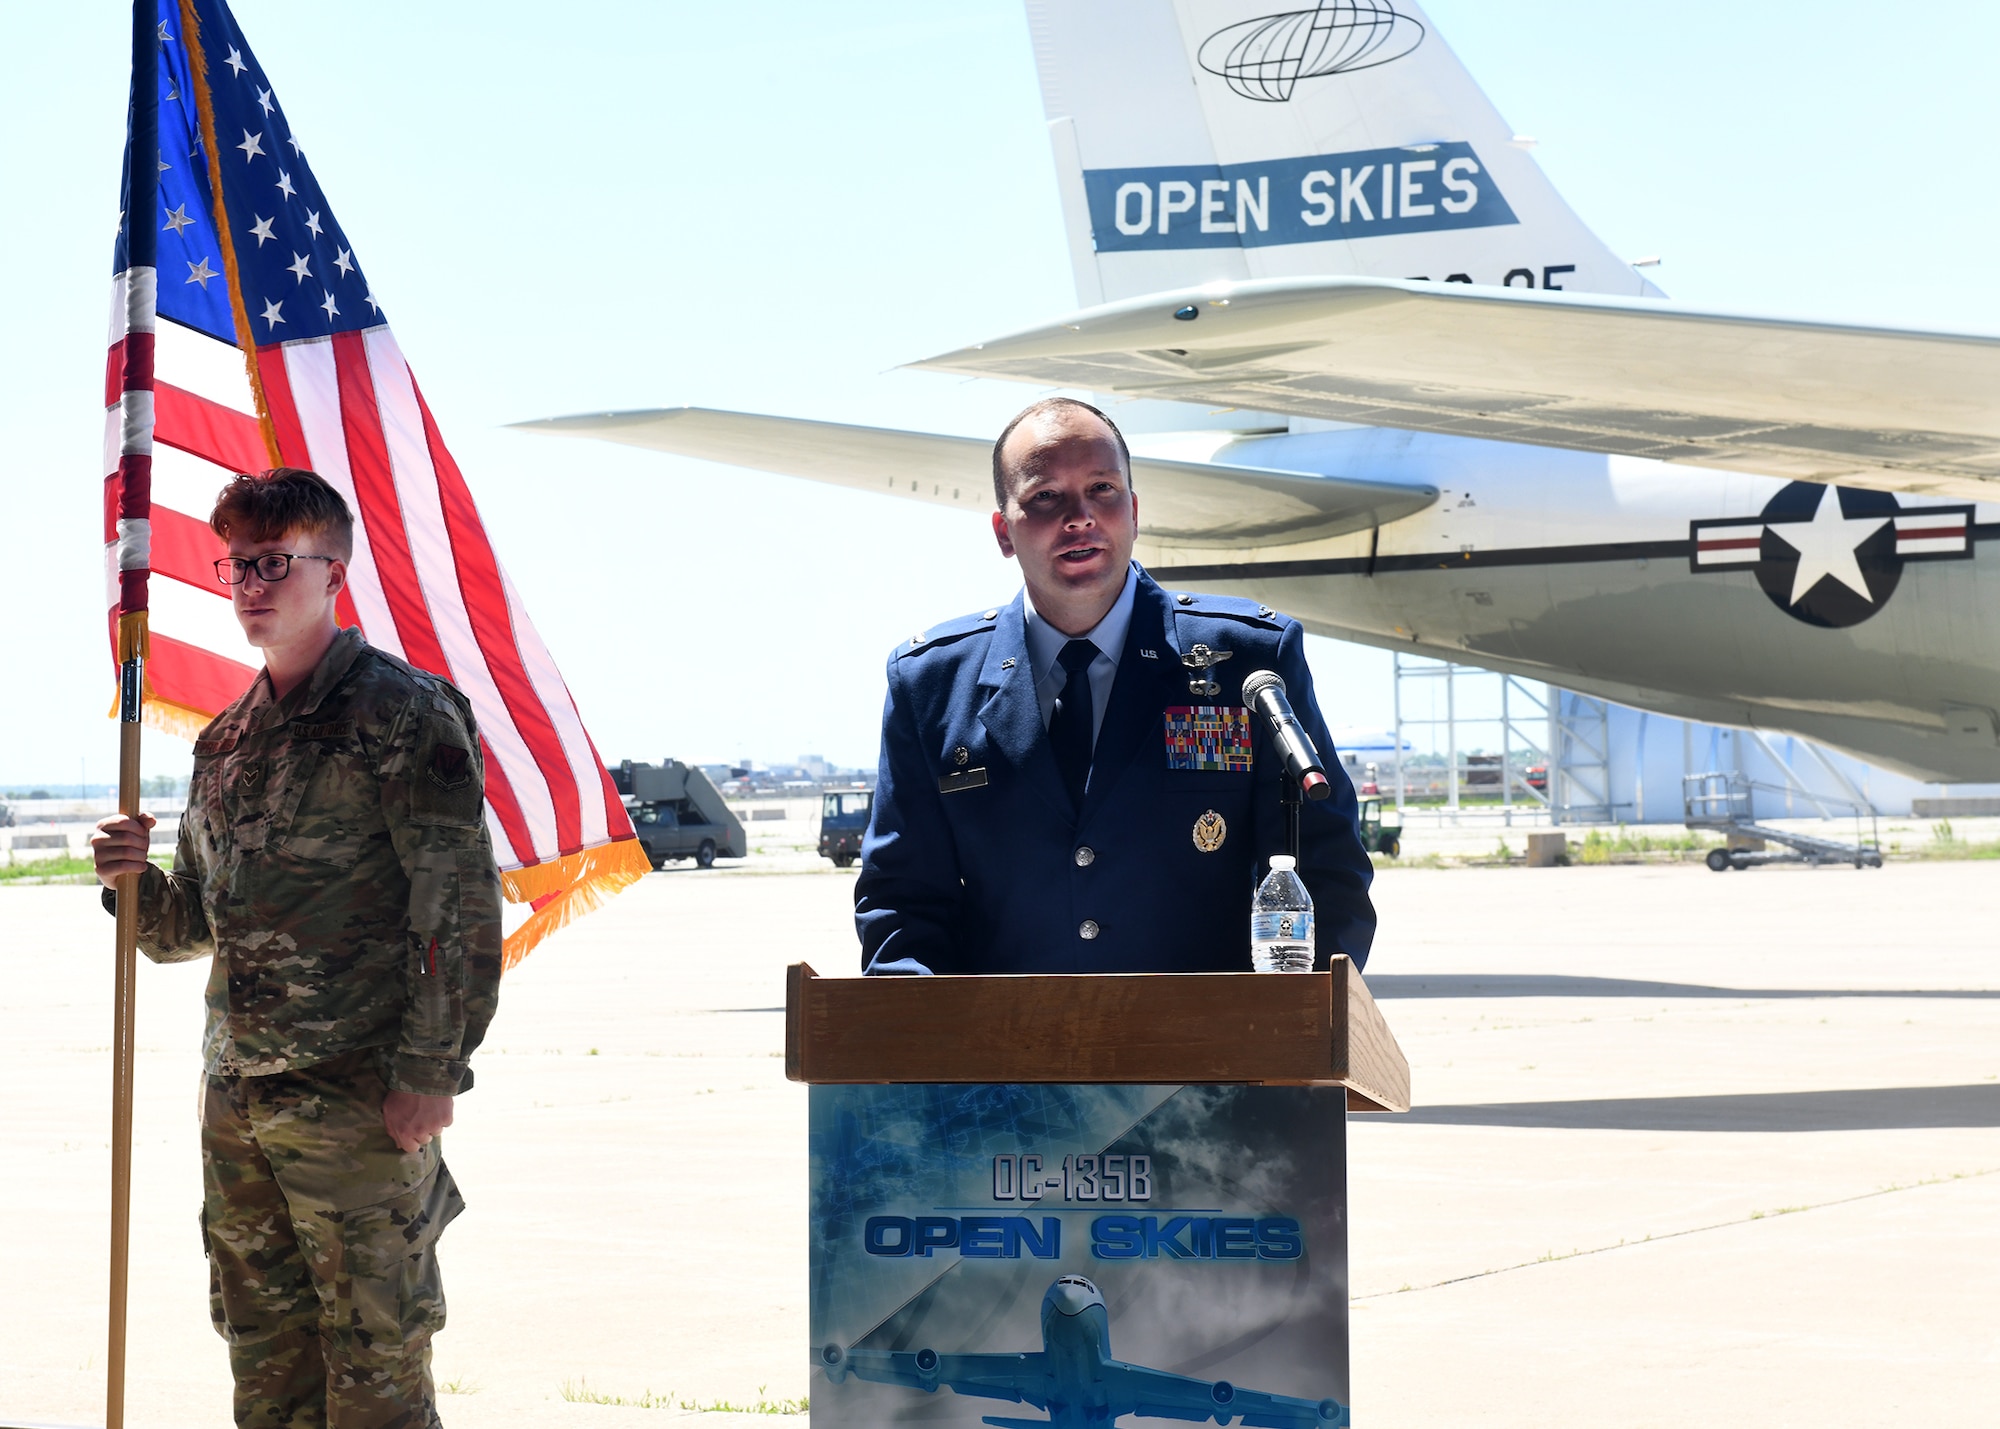 Man in Air Force uniform standing at a podium gives a speech. An Airman stands nearby holding the U.S. flag and the retiring aircraft is in the background.